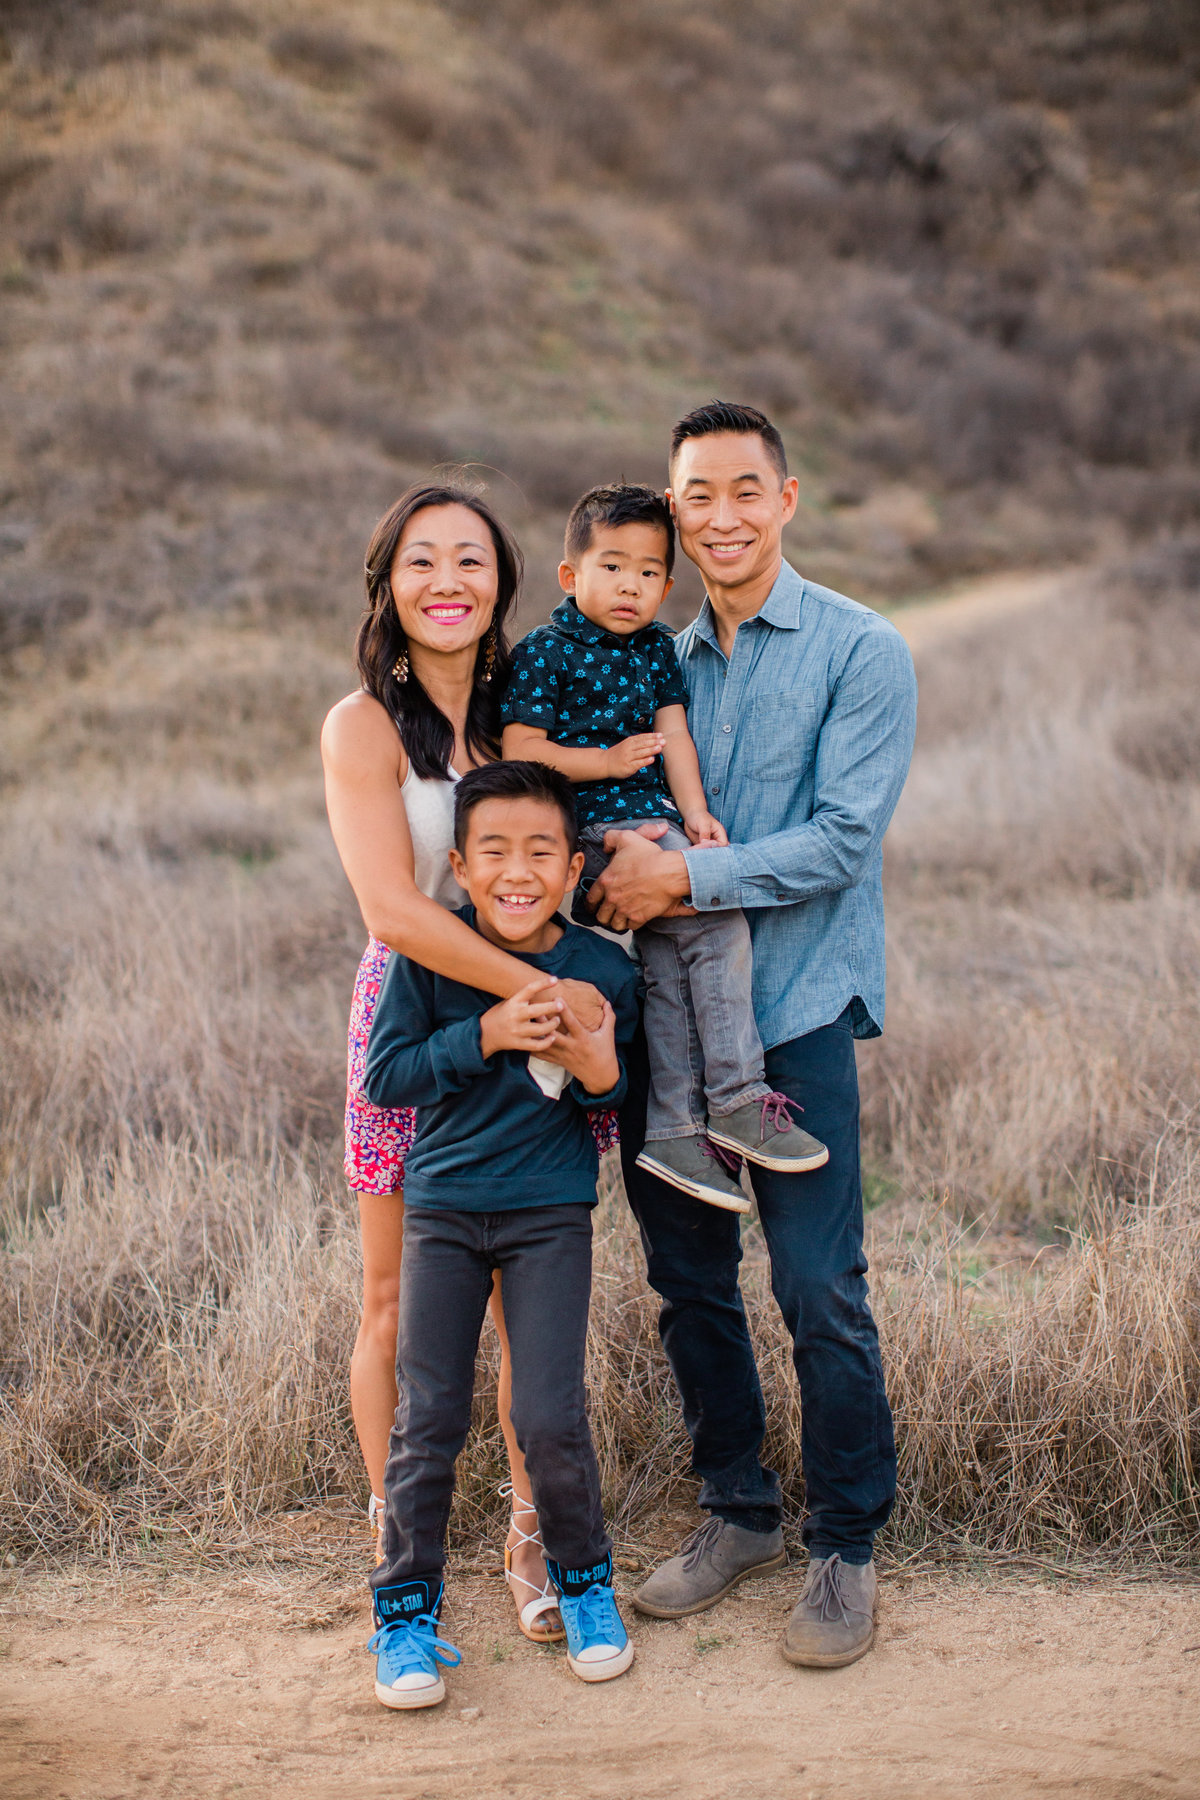 The Wong Family 2018 | Redlands Family Photographer | Katie Schoepflin Photography44